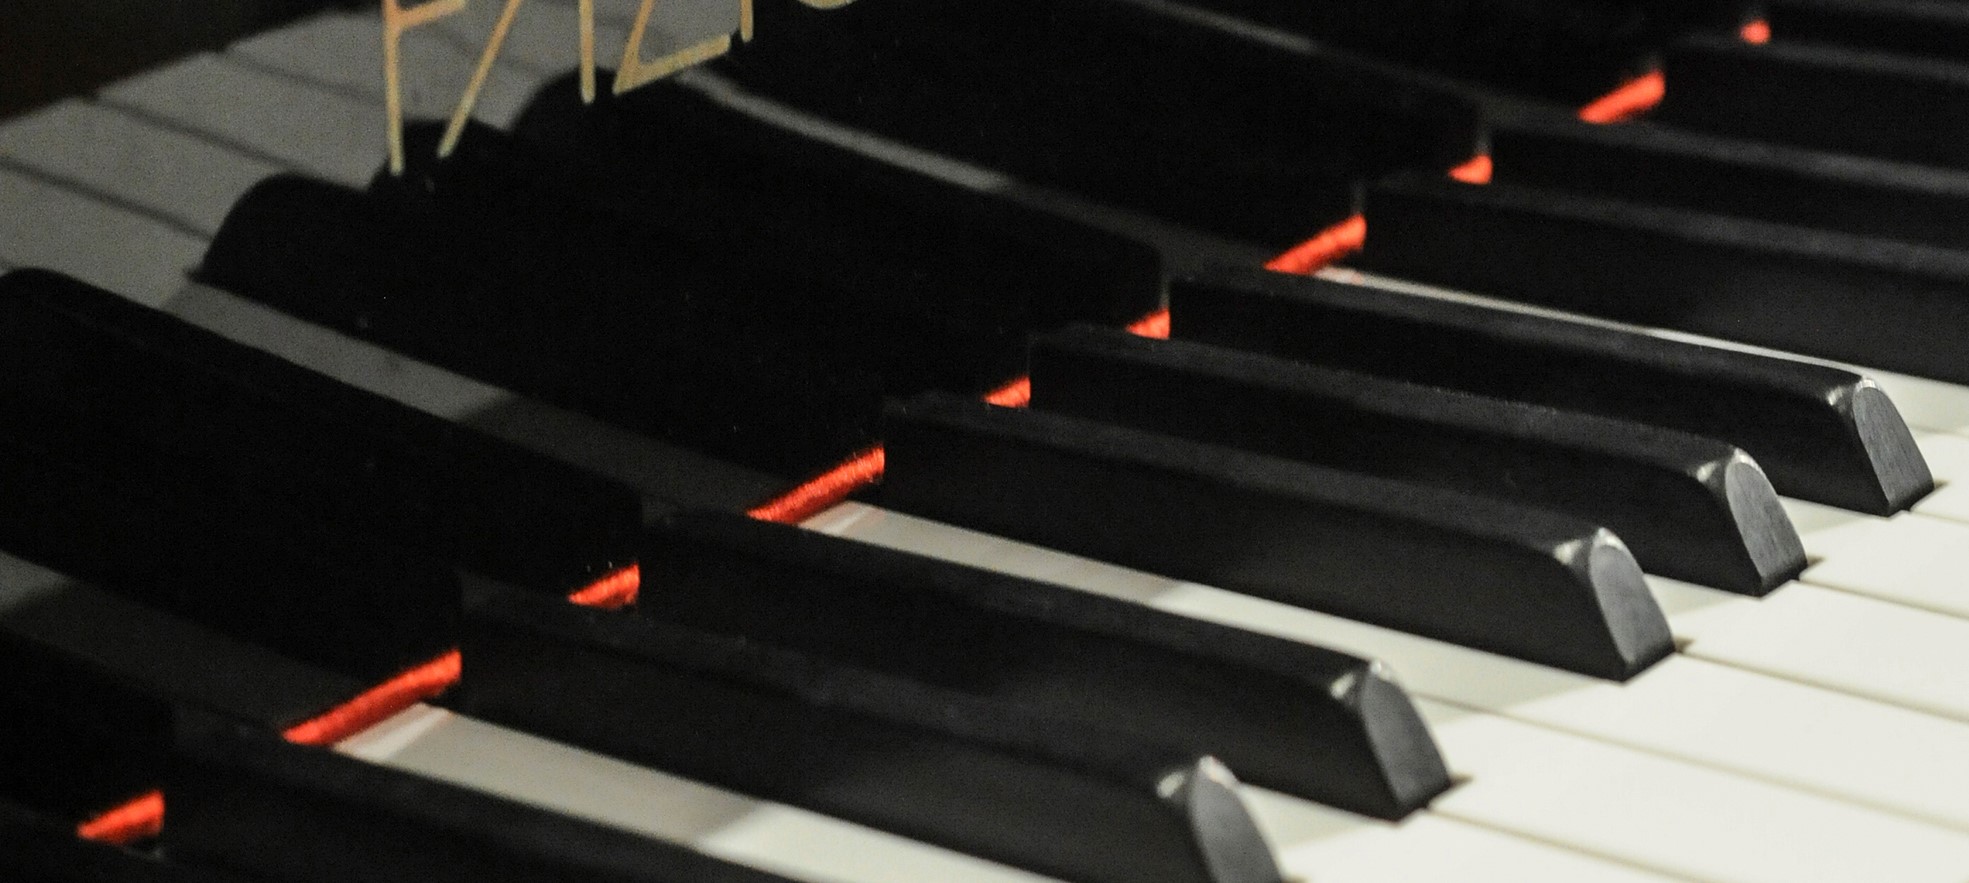 Ouachita to host annual Virginia Queen Piano Competition May 4.